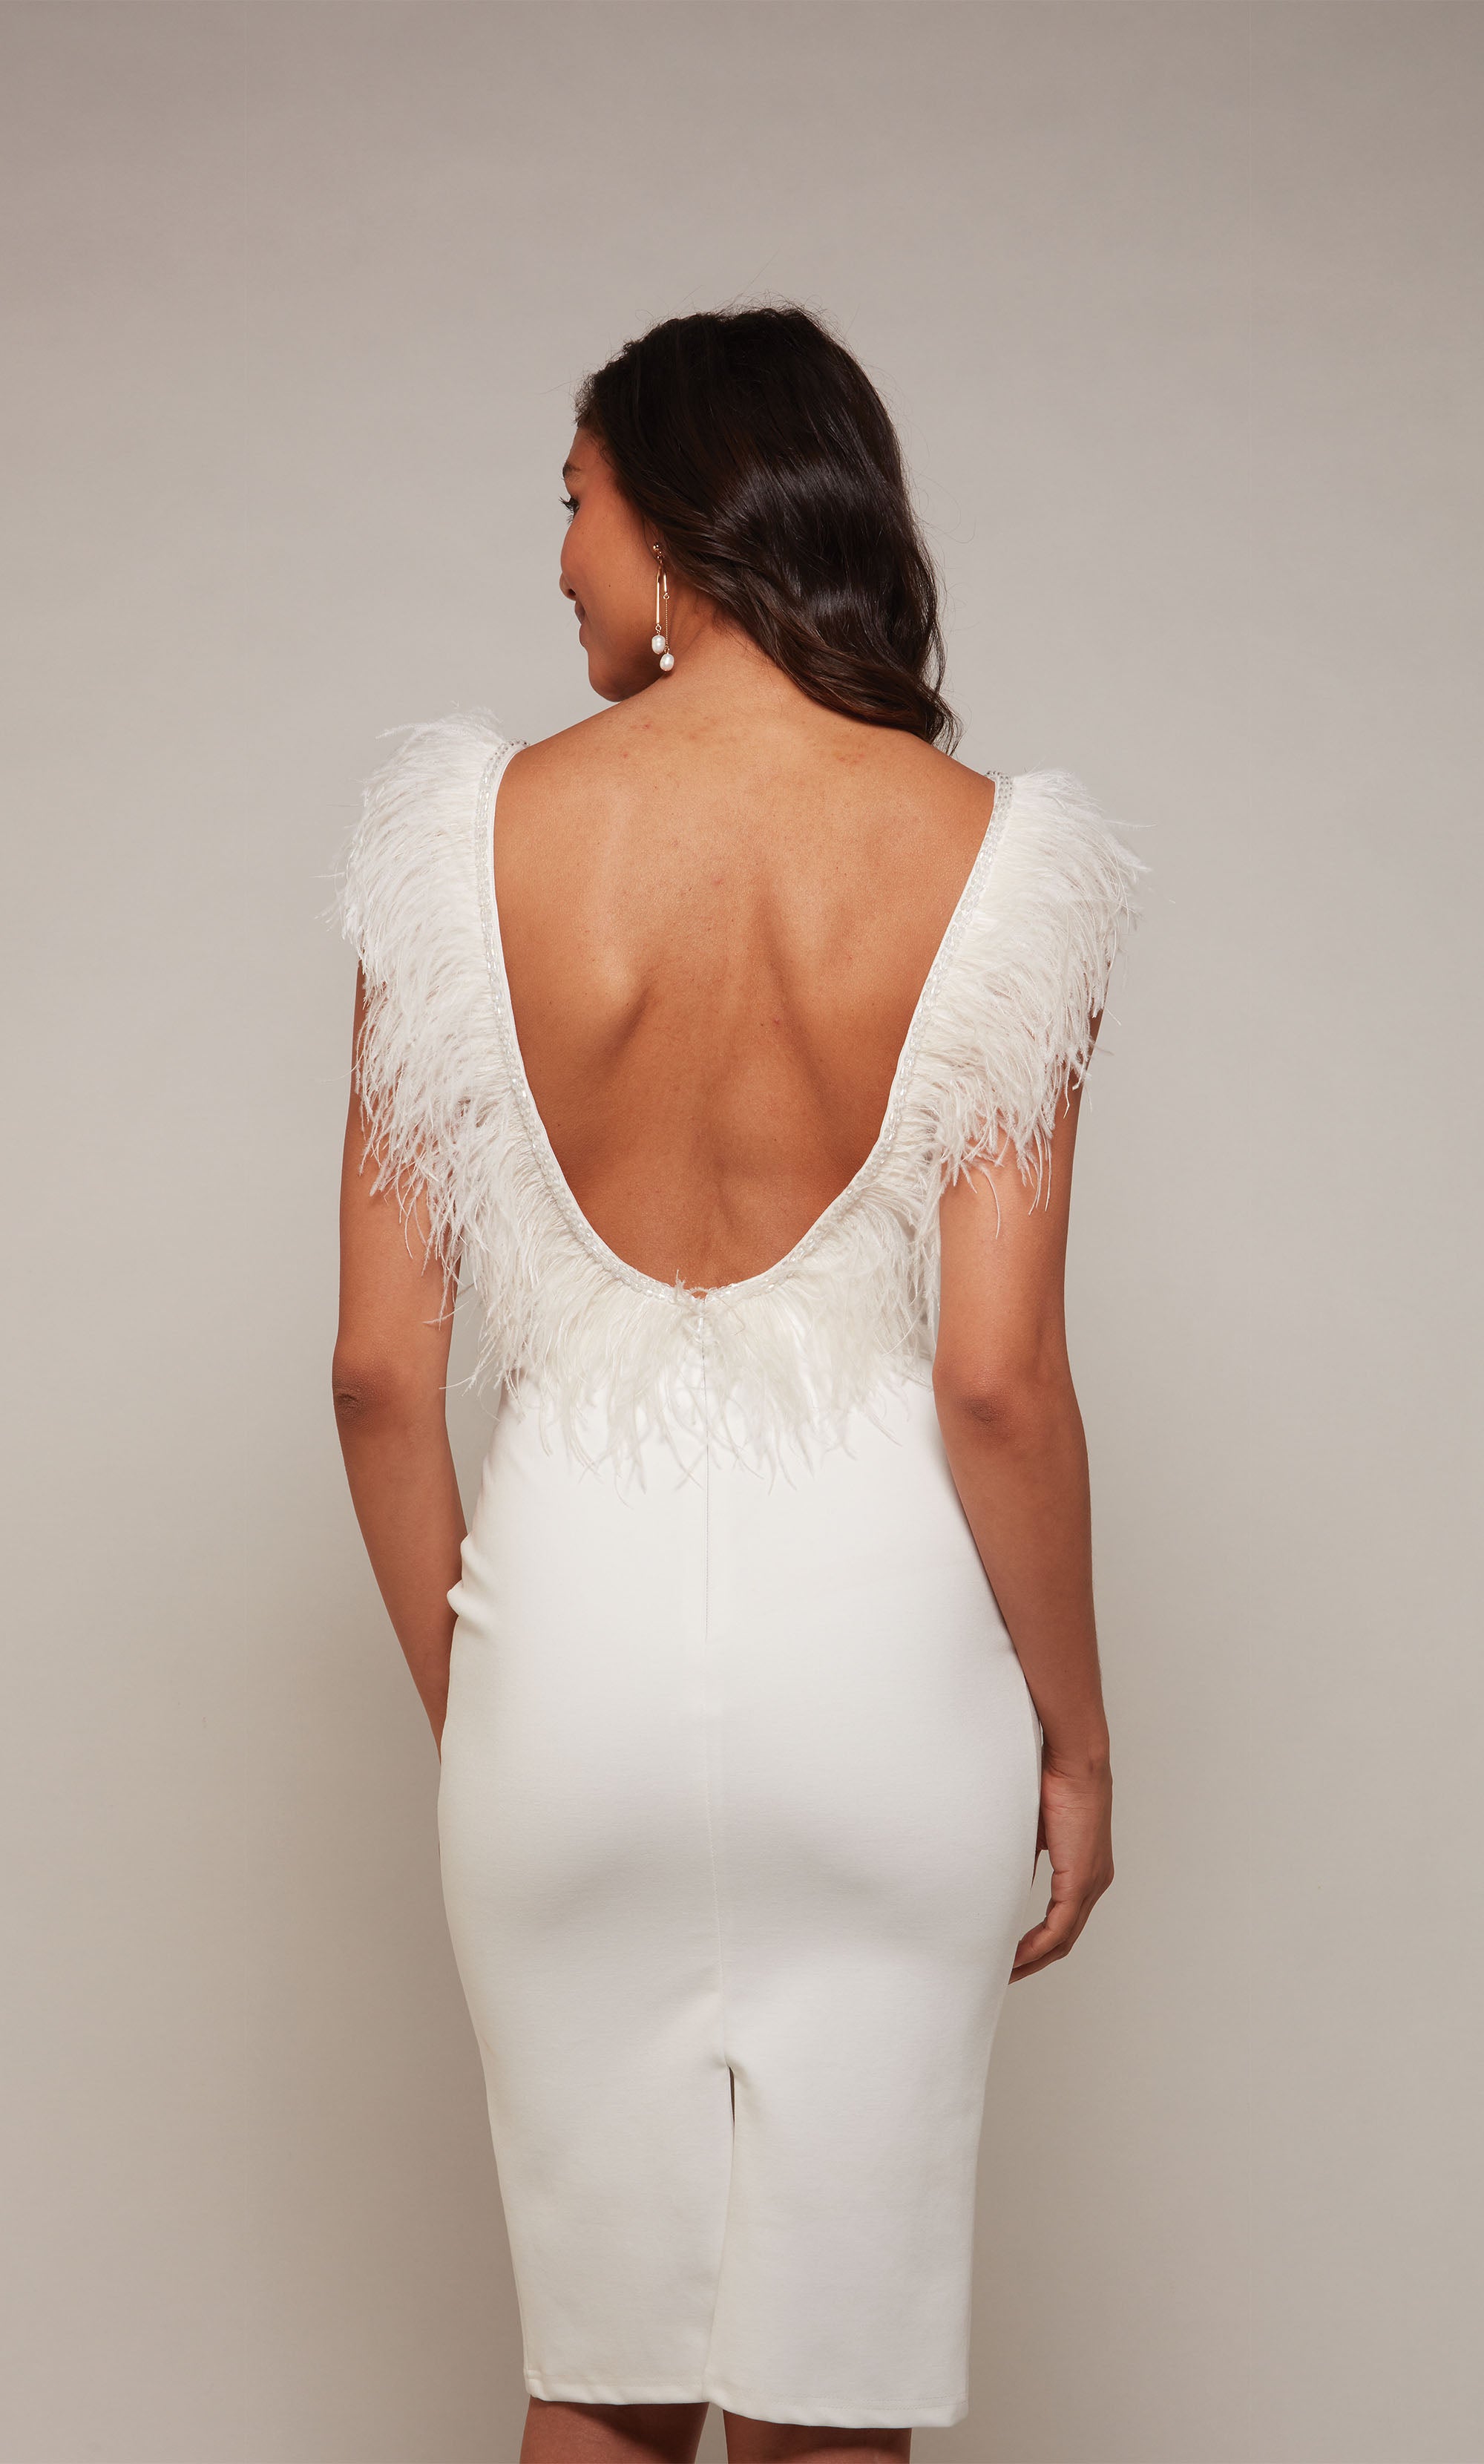 A chic, knee length cocktail dress with a plunging neckline and feather trim in diamond white.